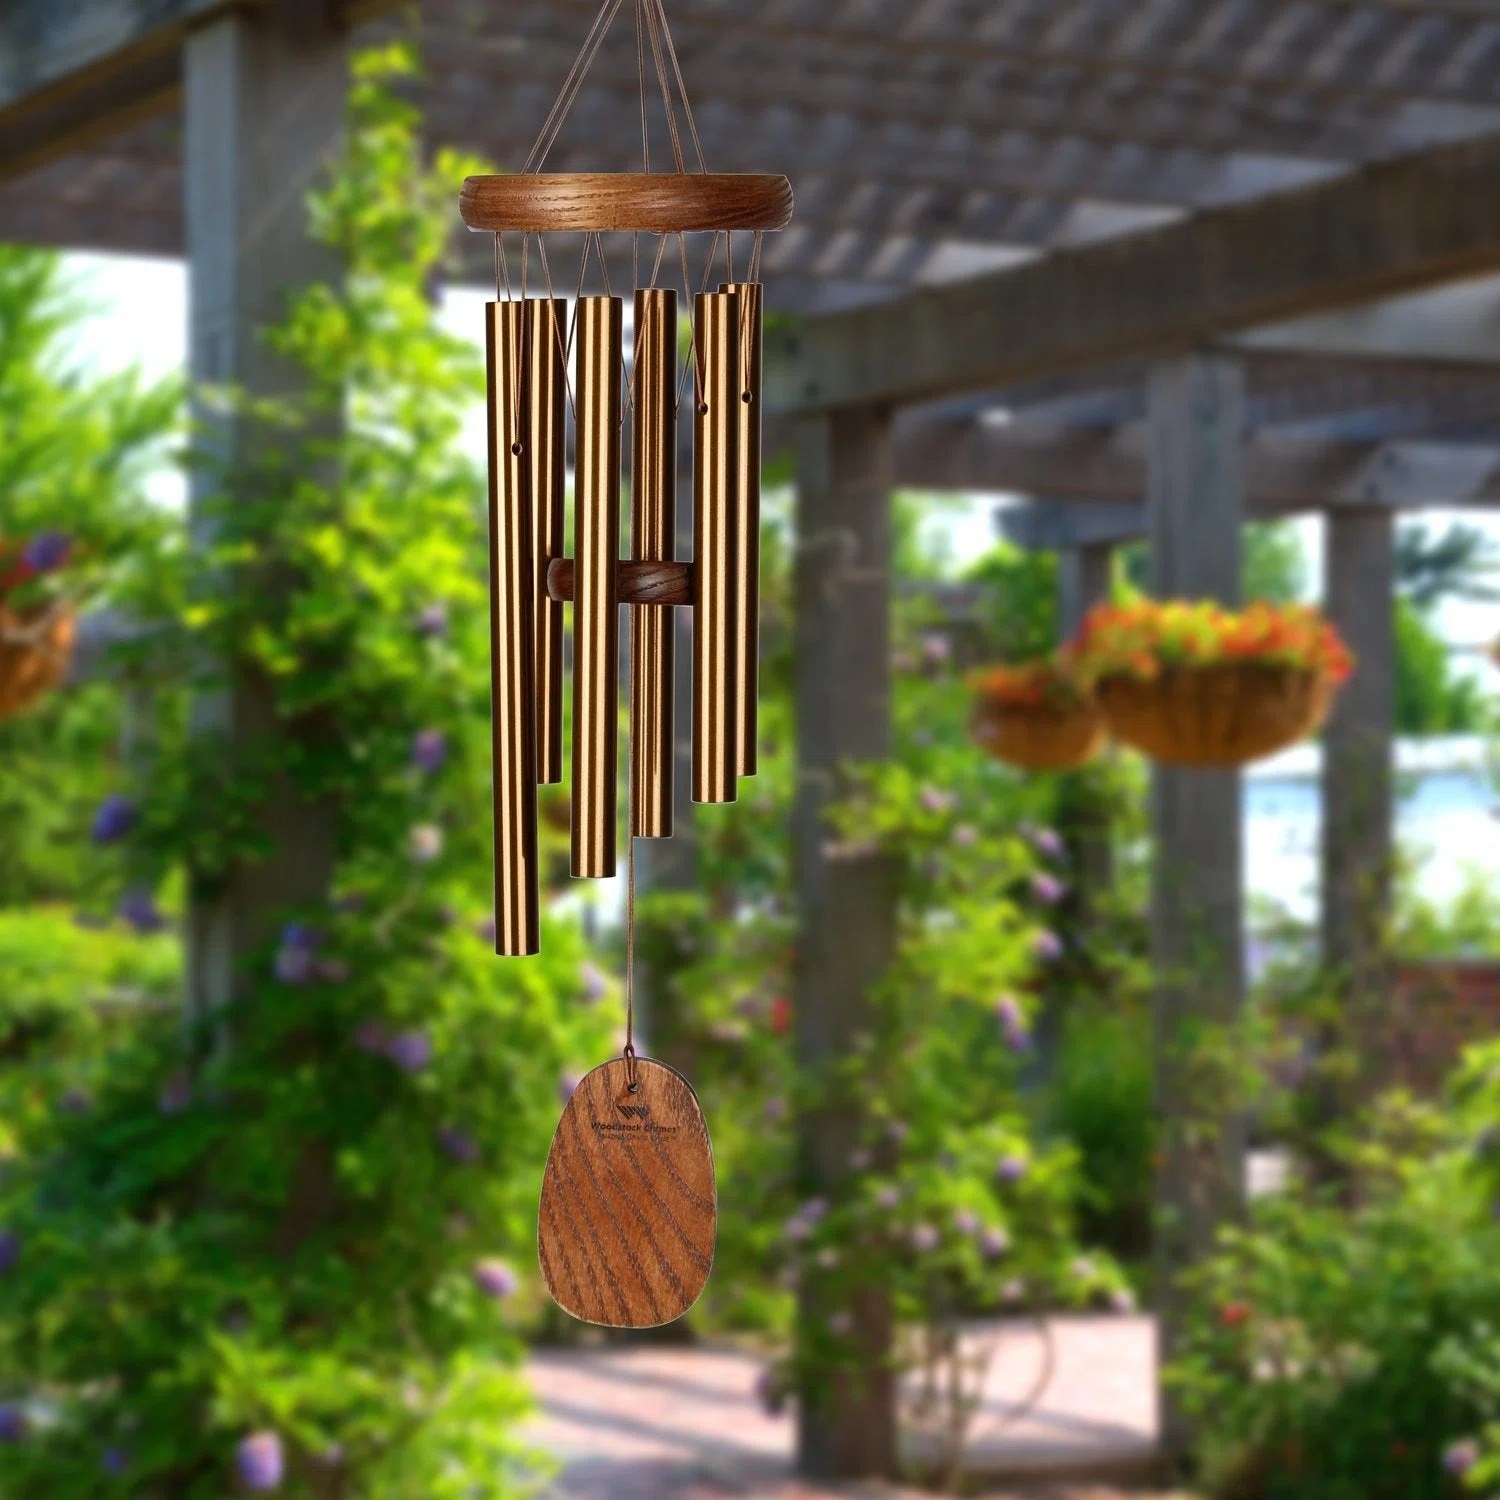 The wind chime hanging in a garden